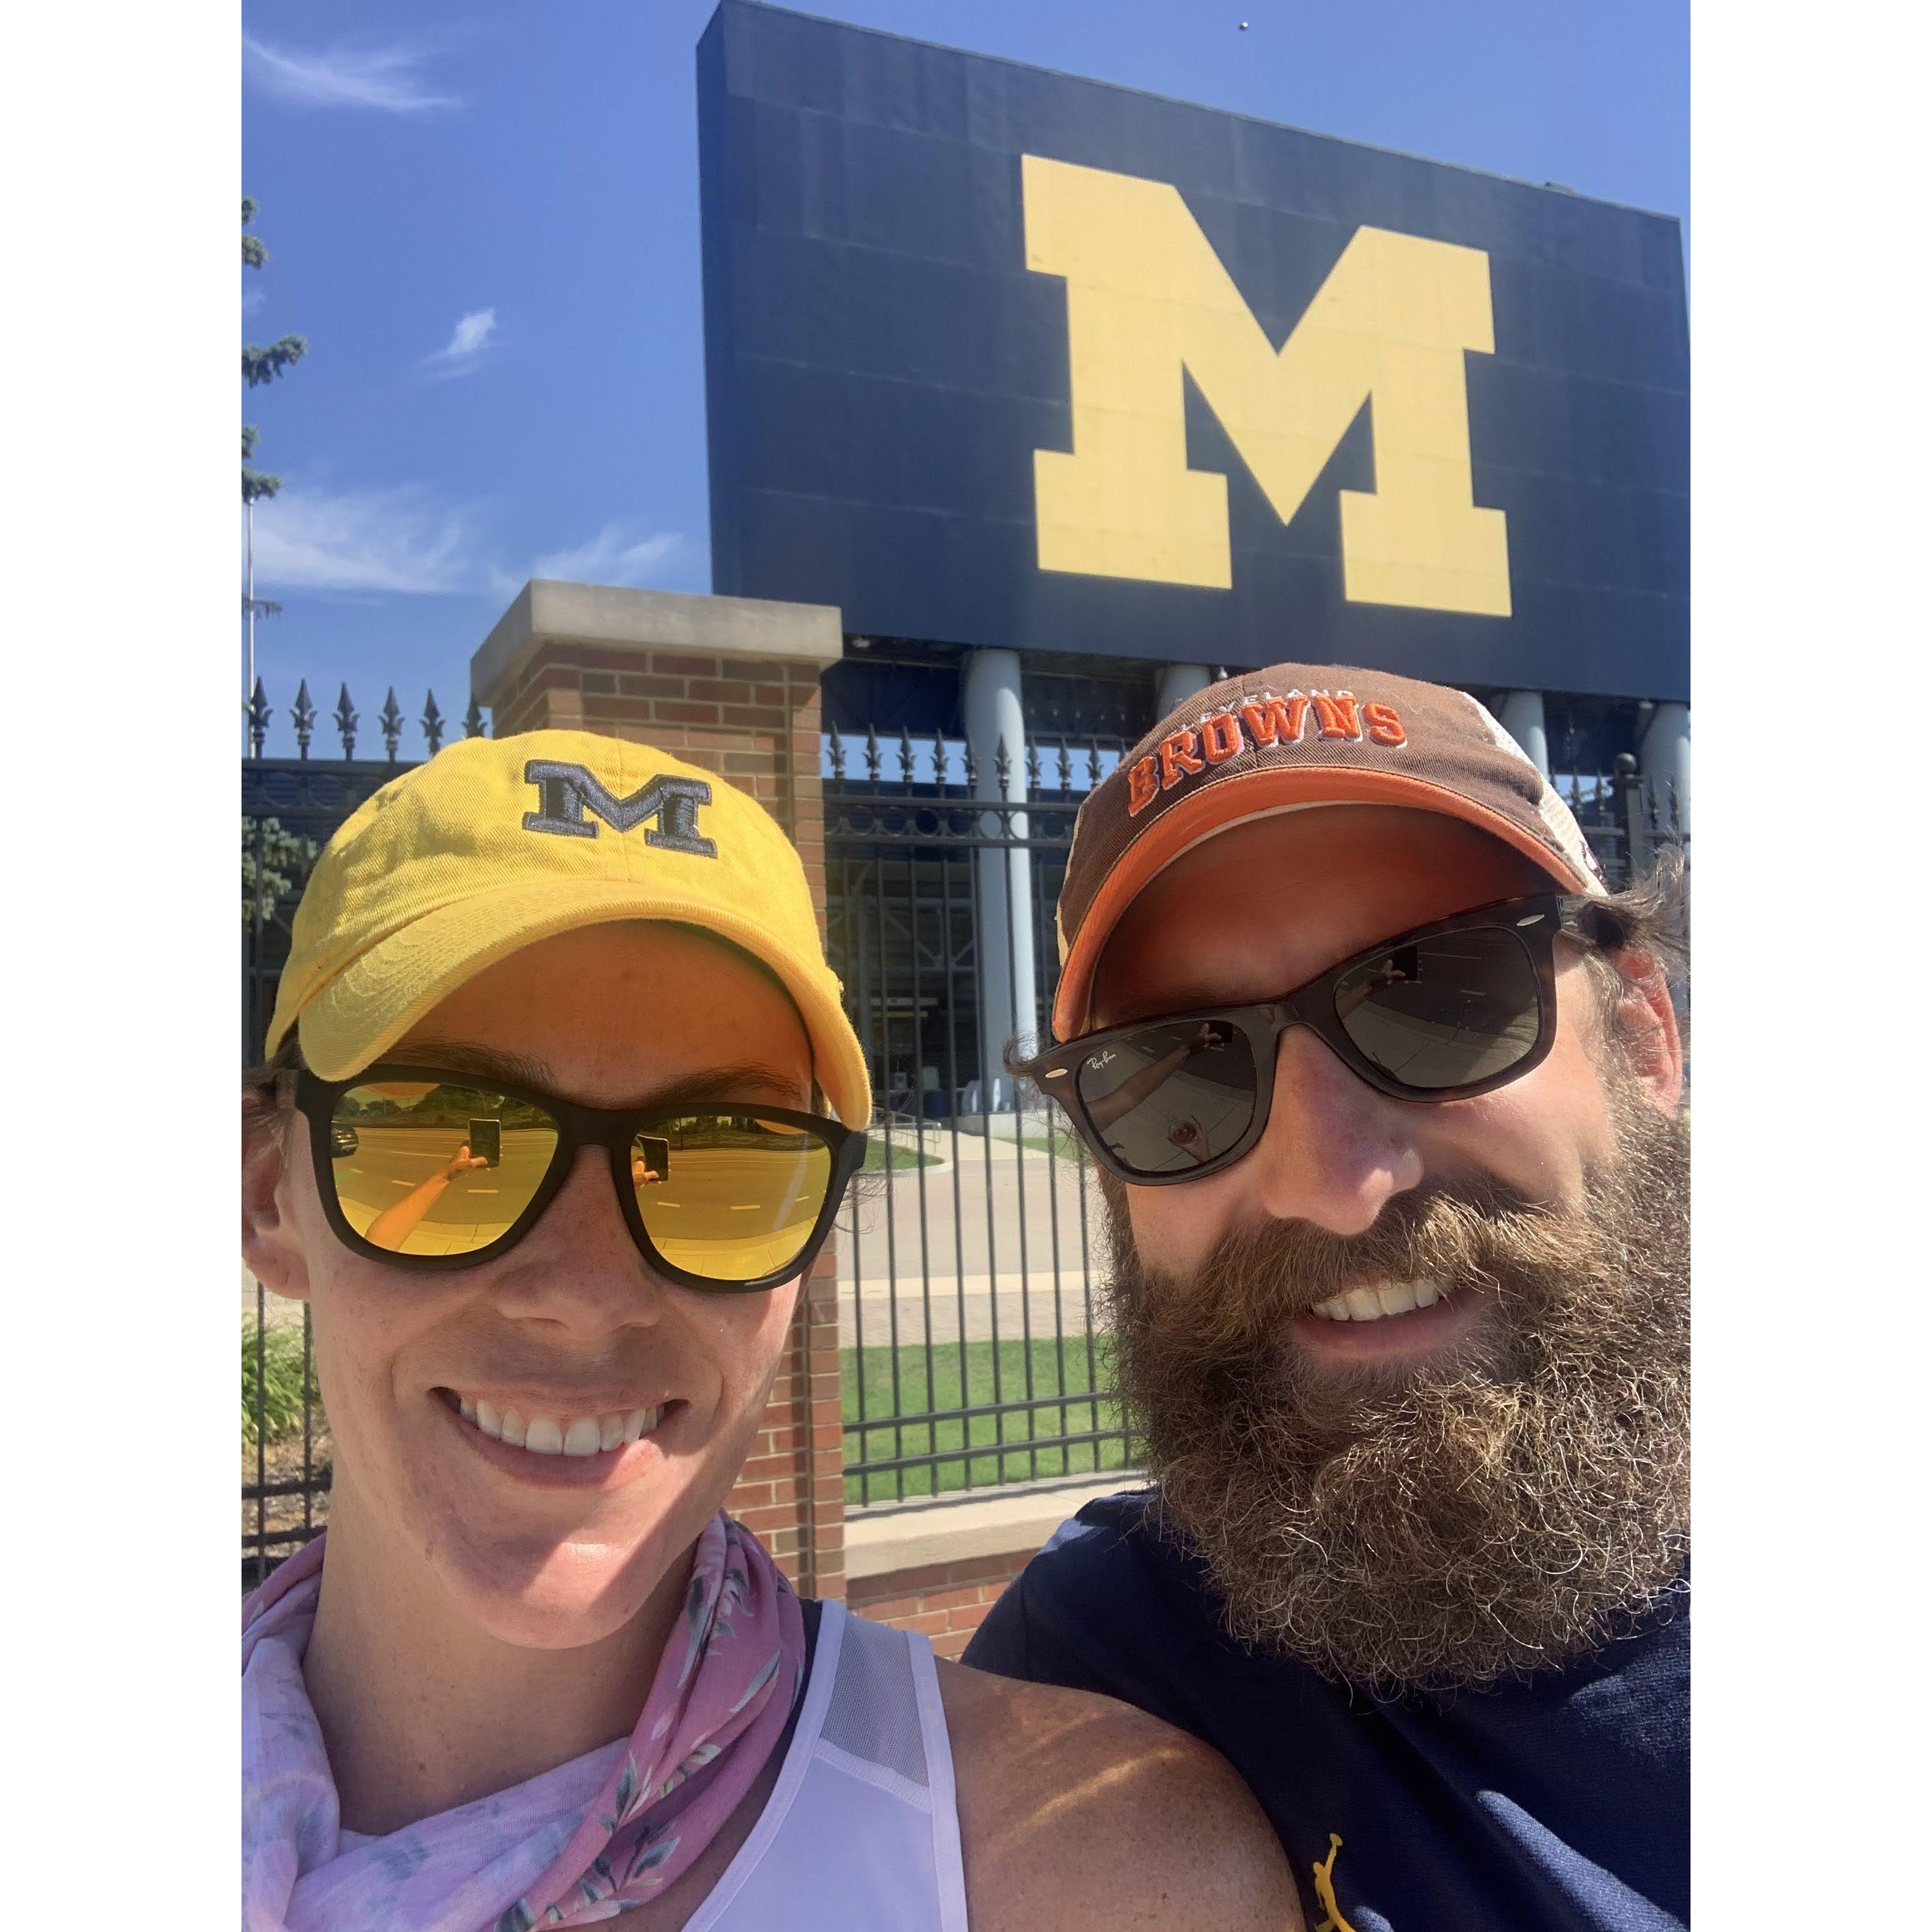 Lang's first visit to the Big House 07/2020